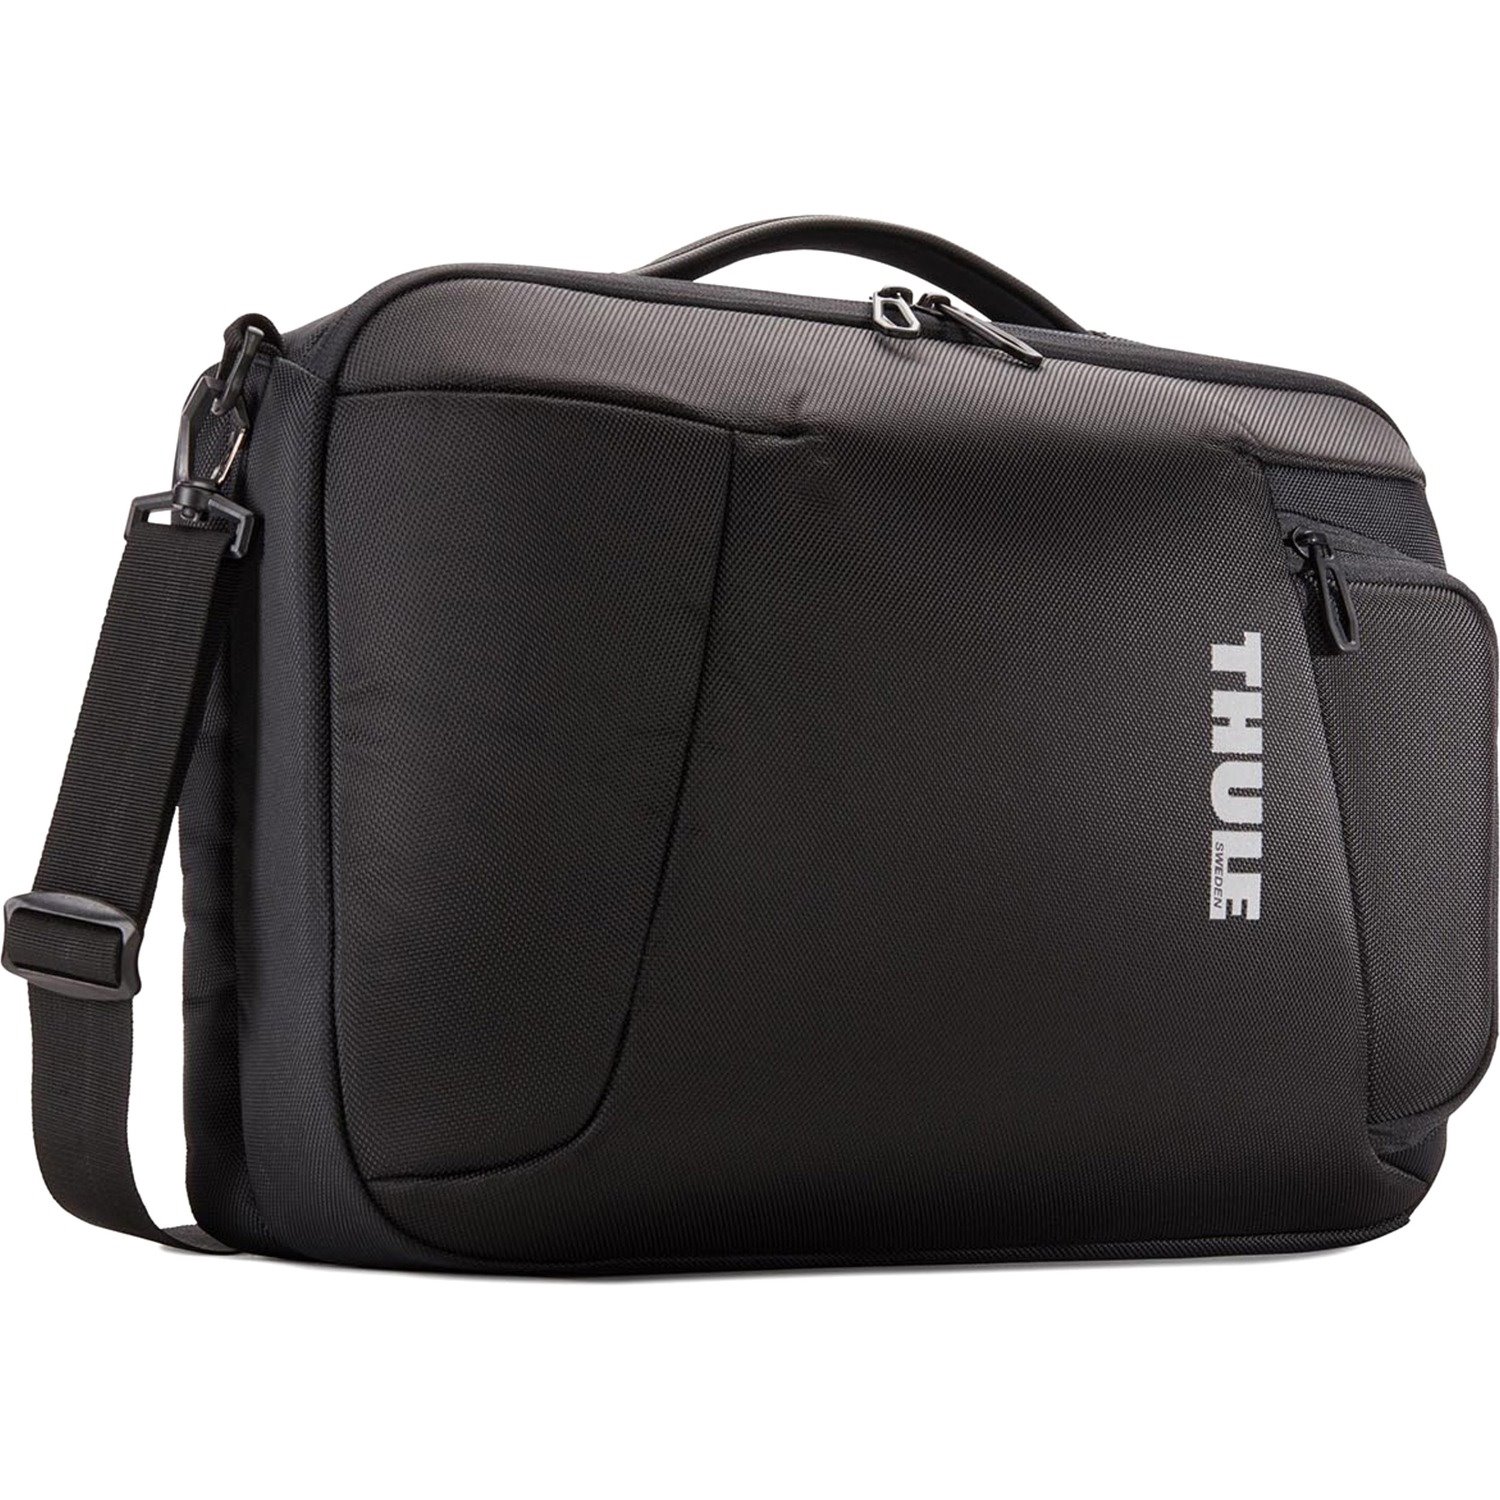 Thule Accent Carrying Case (Briefcase) for 15.6" Notebook, Travel Essential, Tablet PC - Black